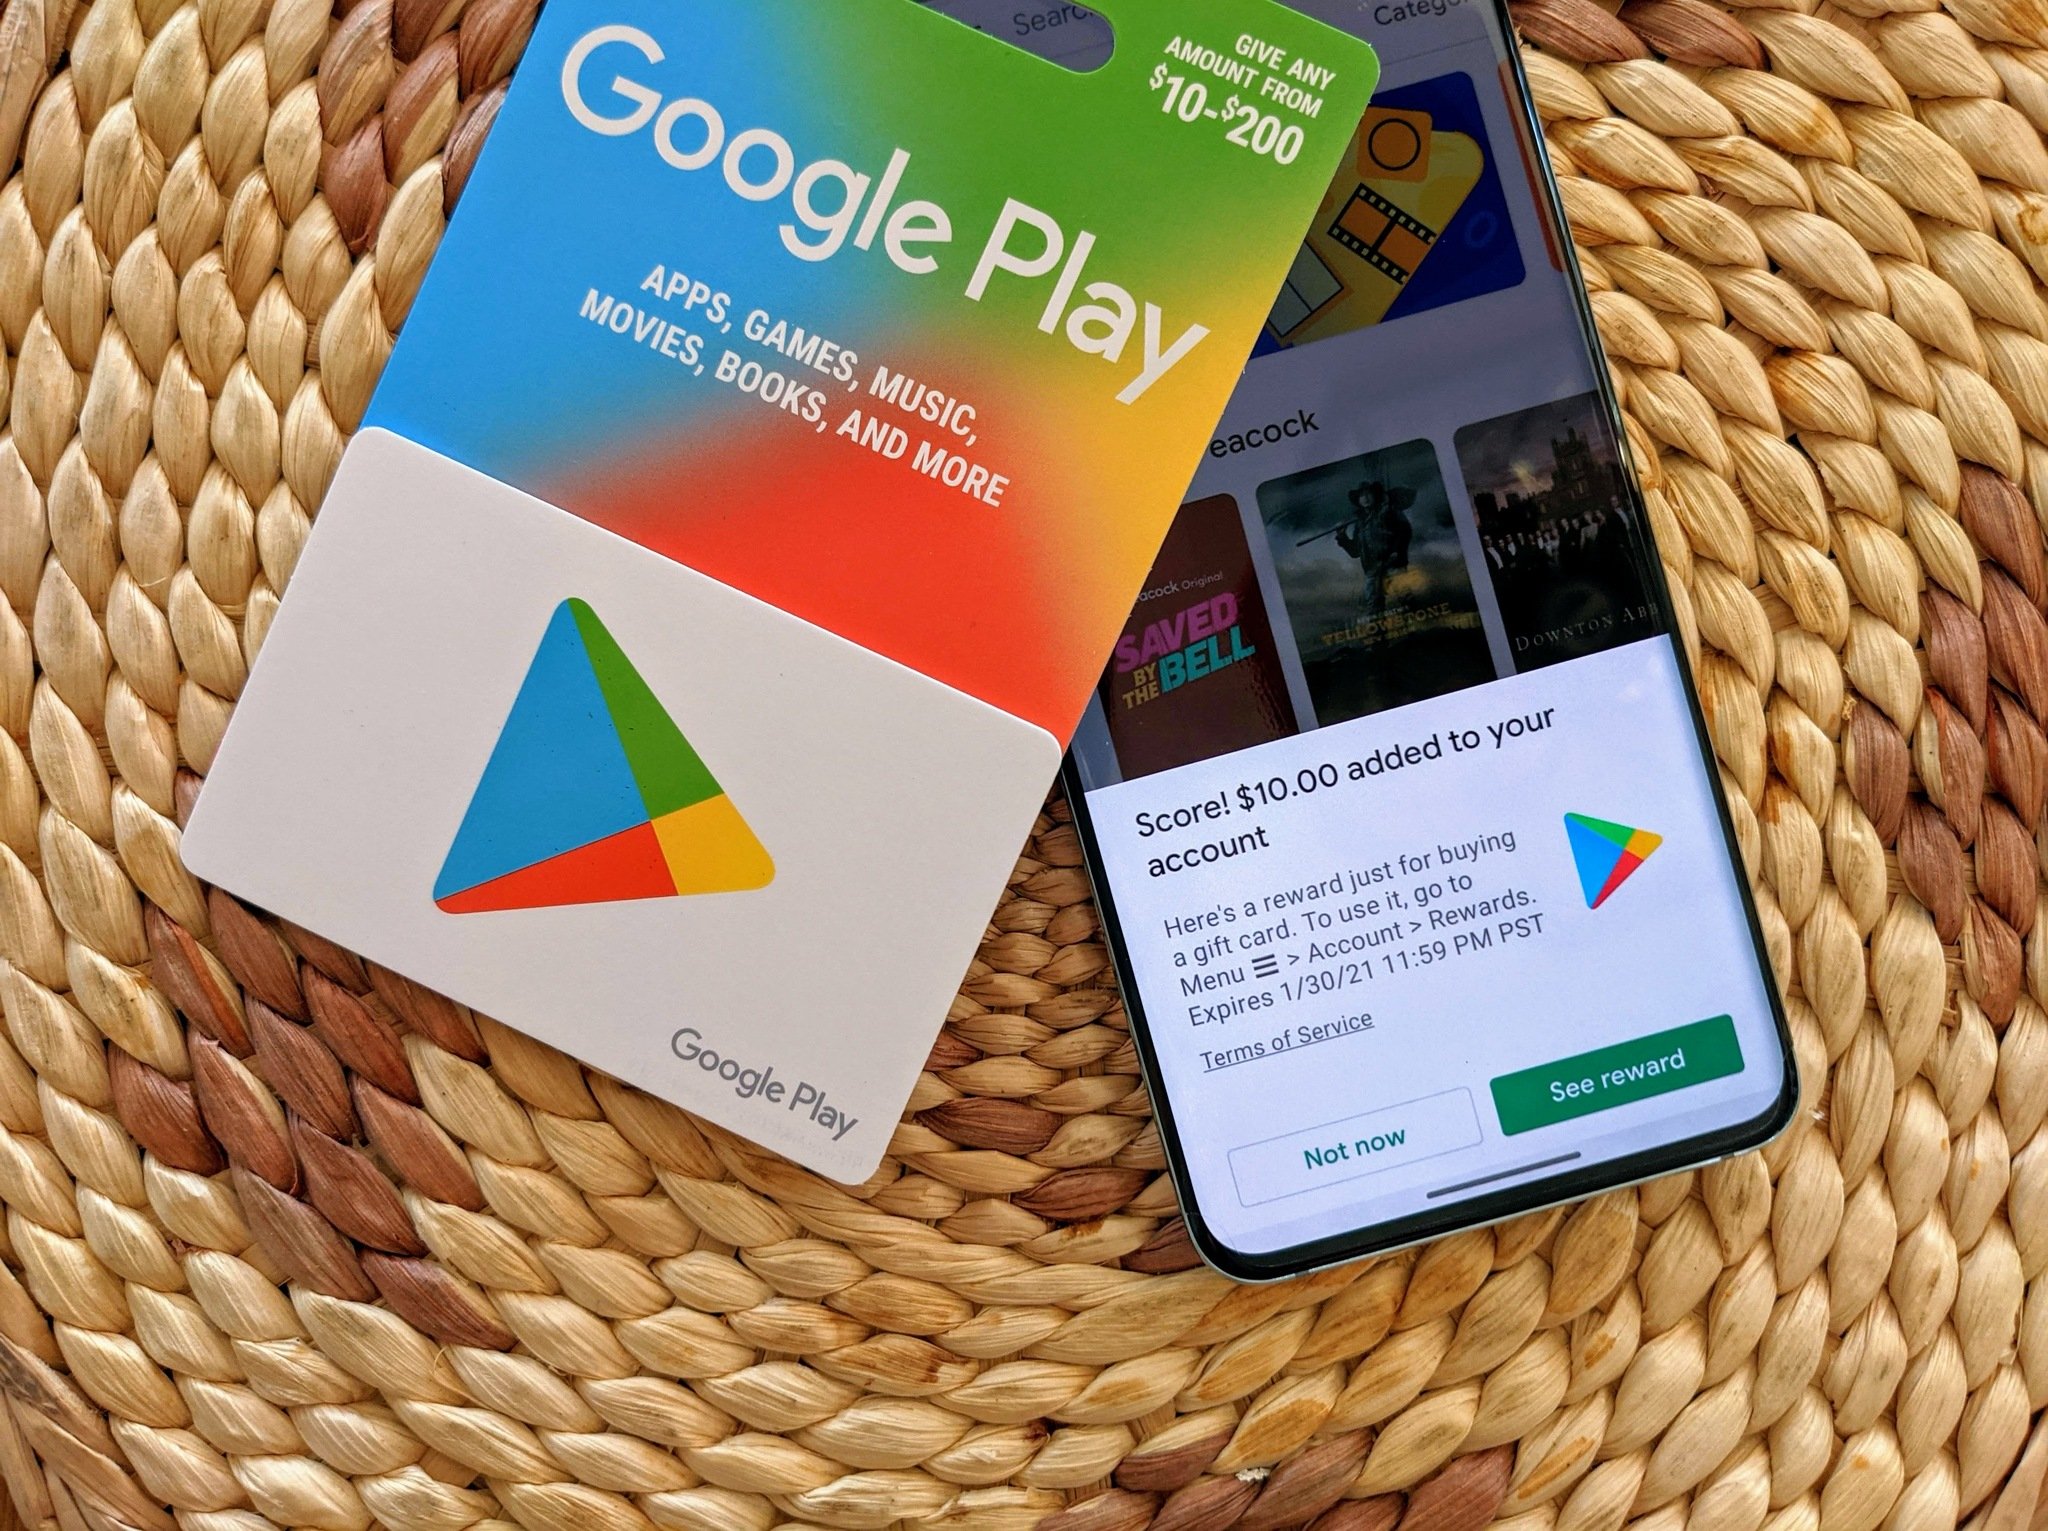 What Can I Spend My Google Play Gift Card on?